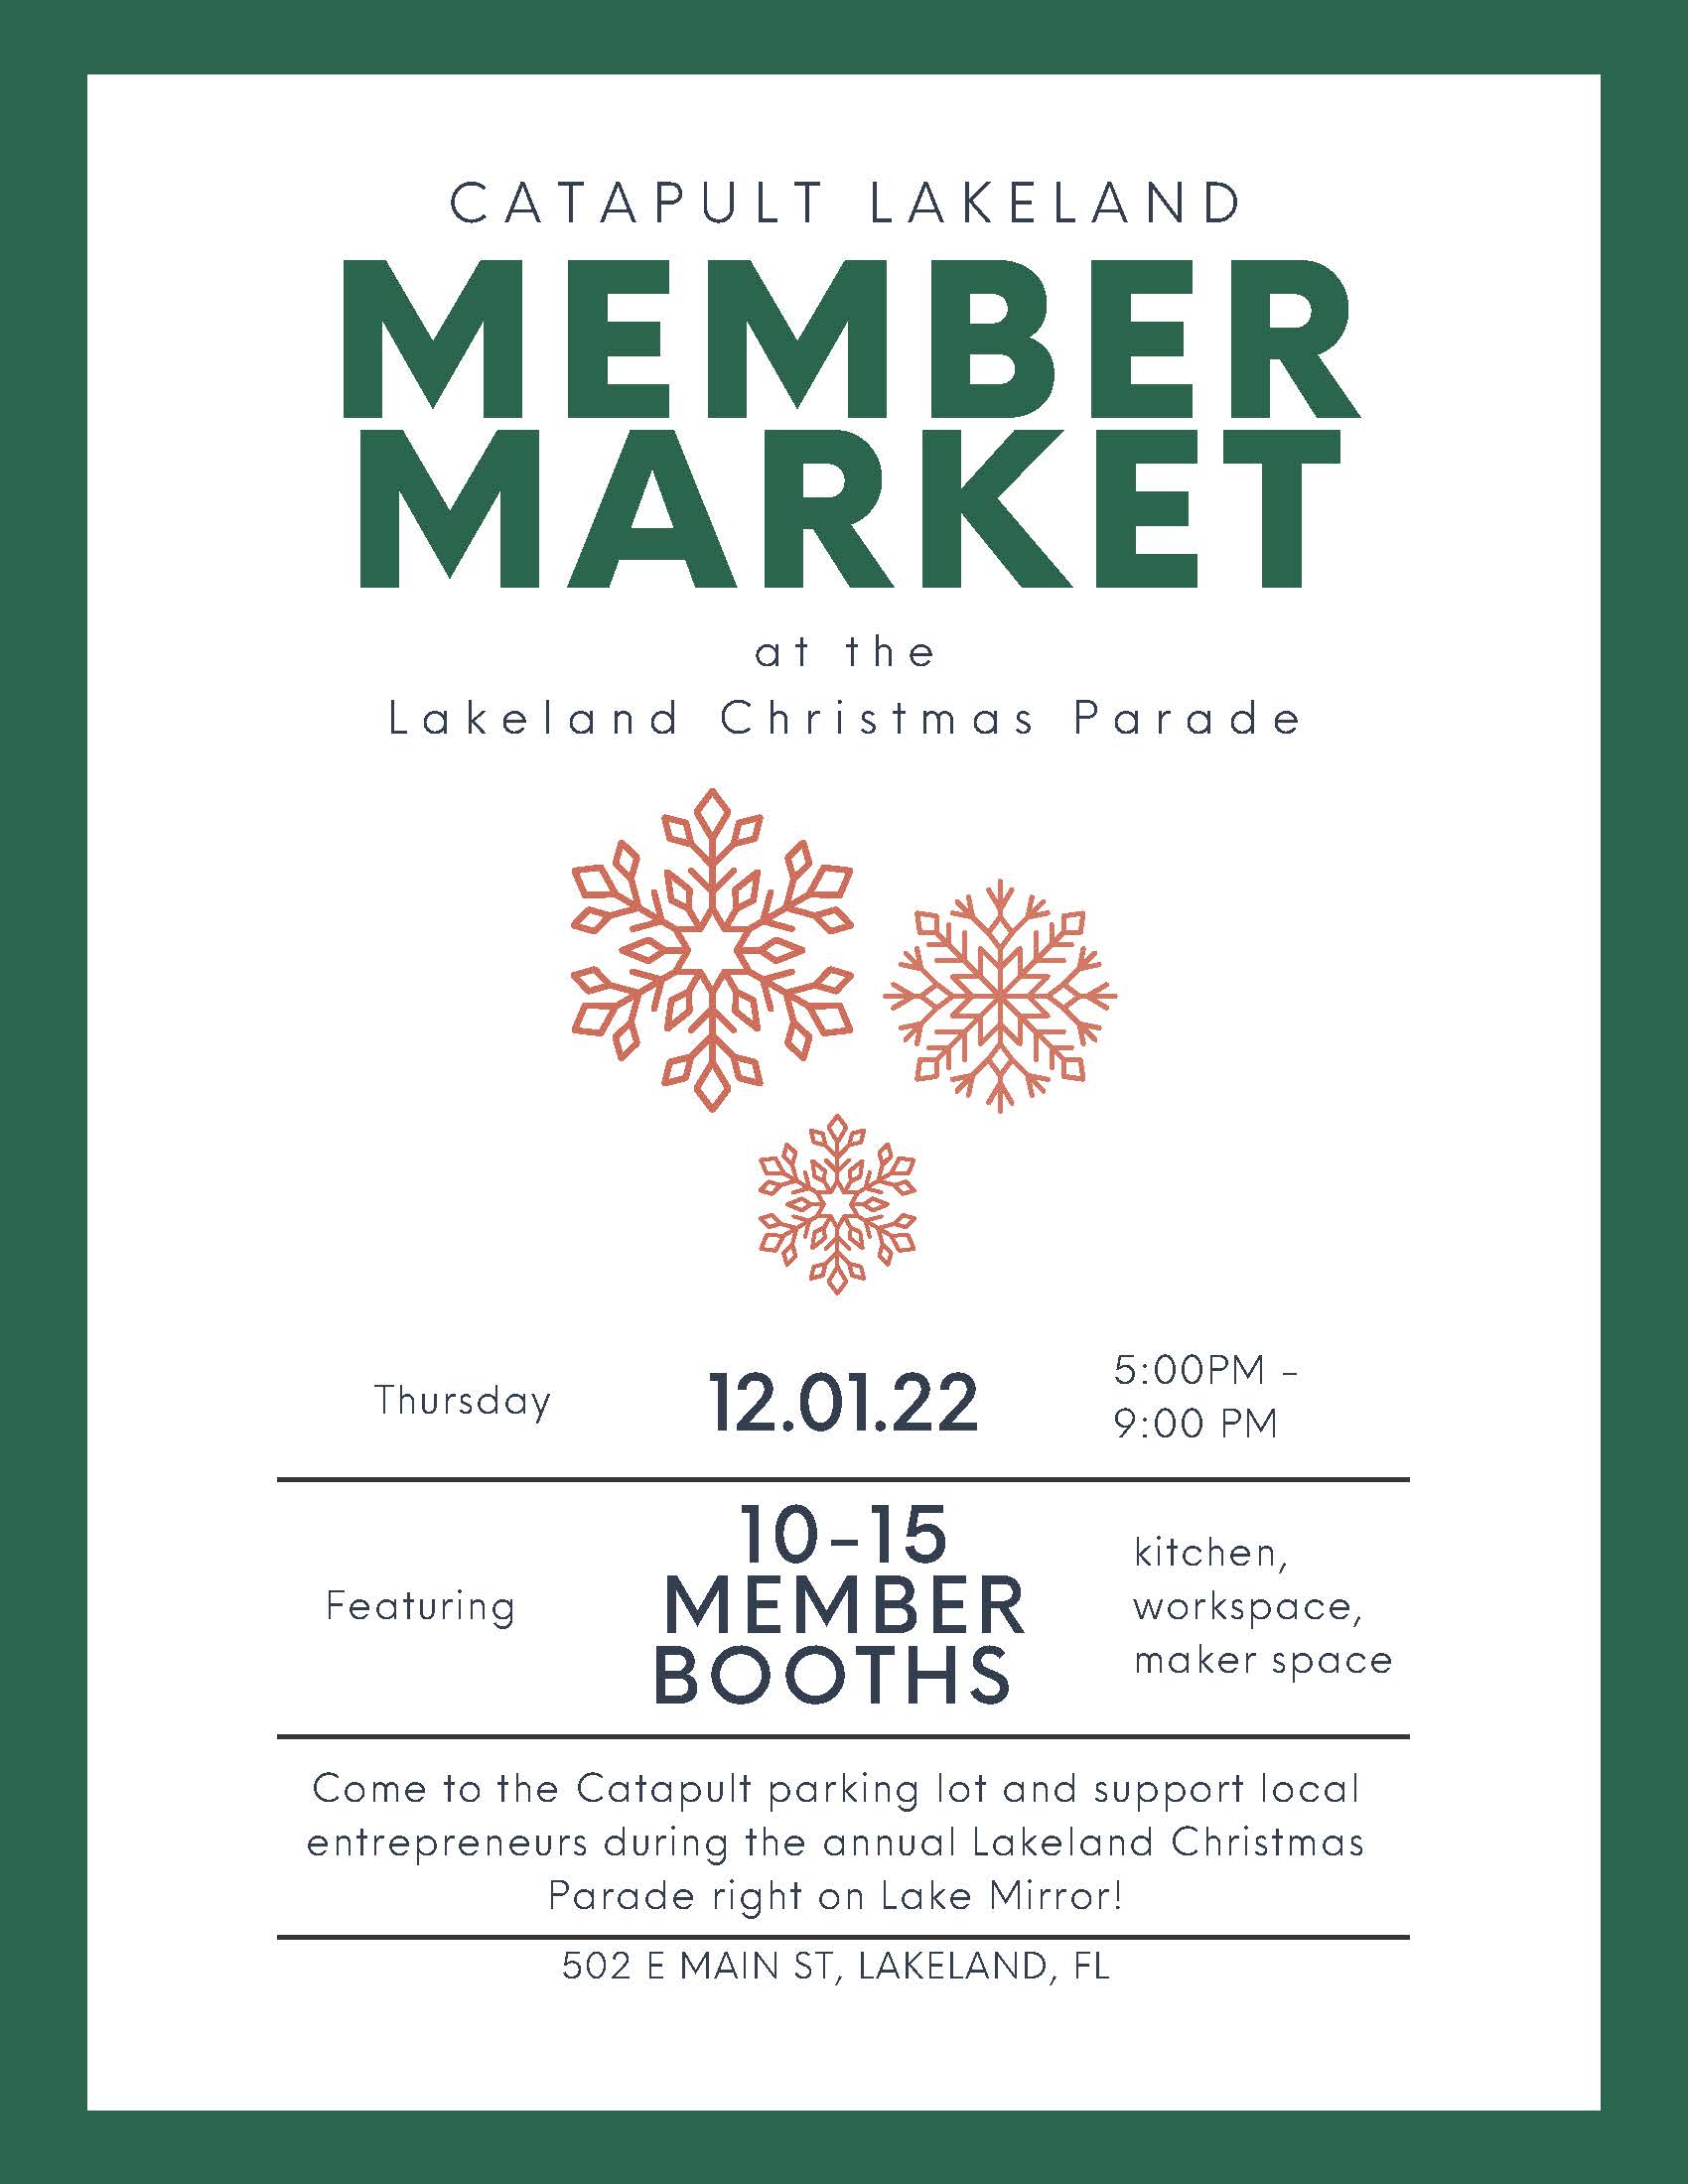 502 a main st, Stop by the Catapult Member Market during the annual Lakeland Christmas Parade where a number of Catapult entrepreneurs will be selling food and goods for all to enjoy!